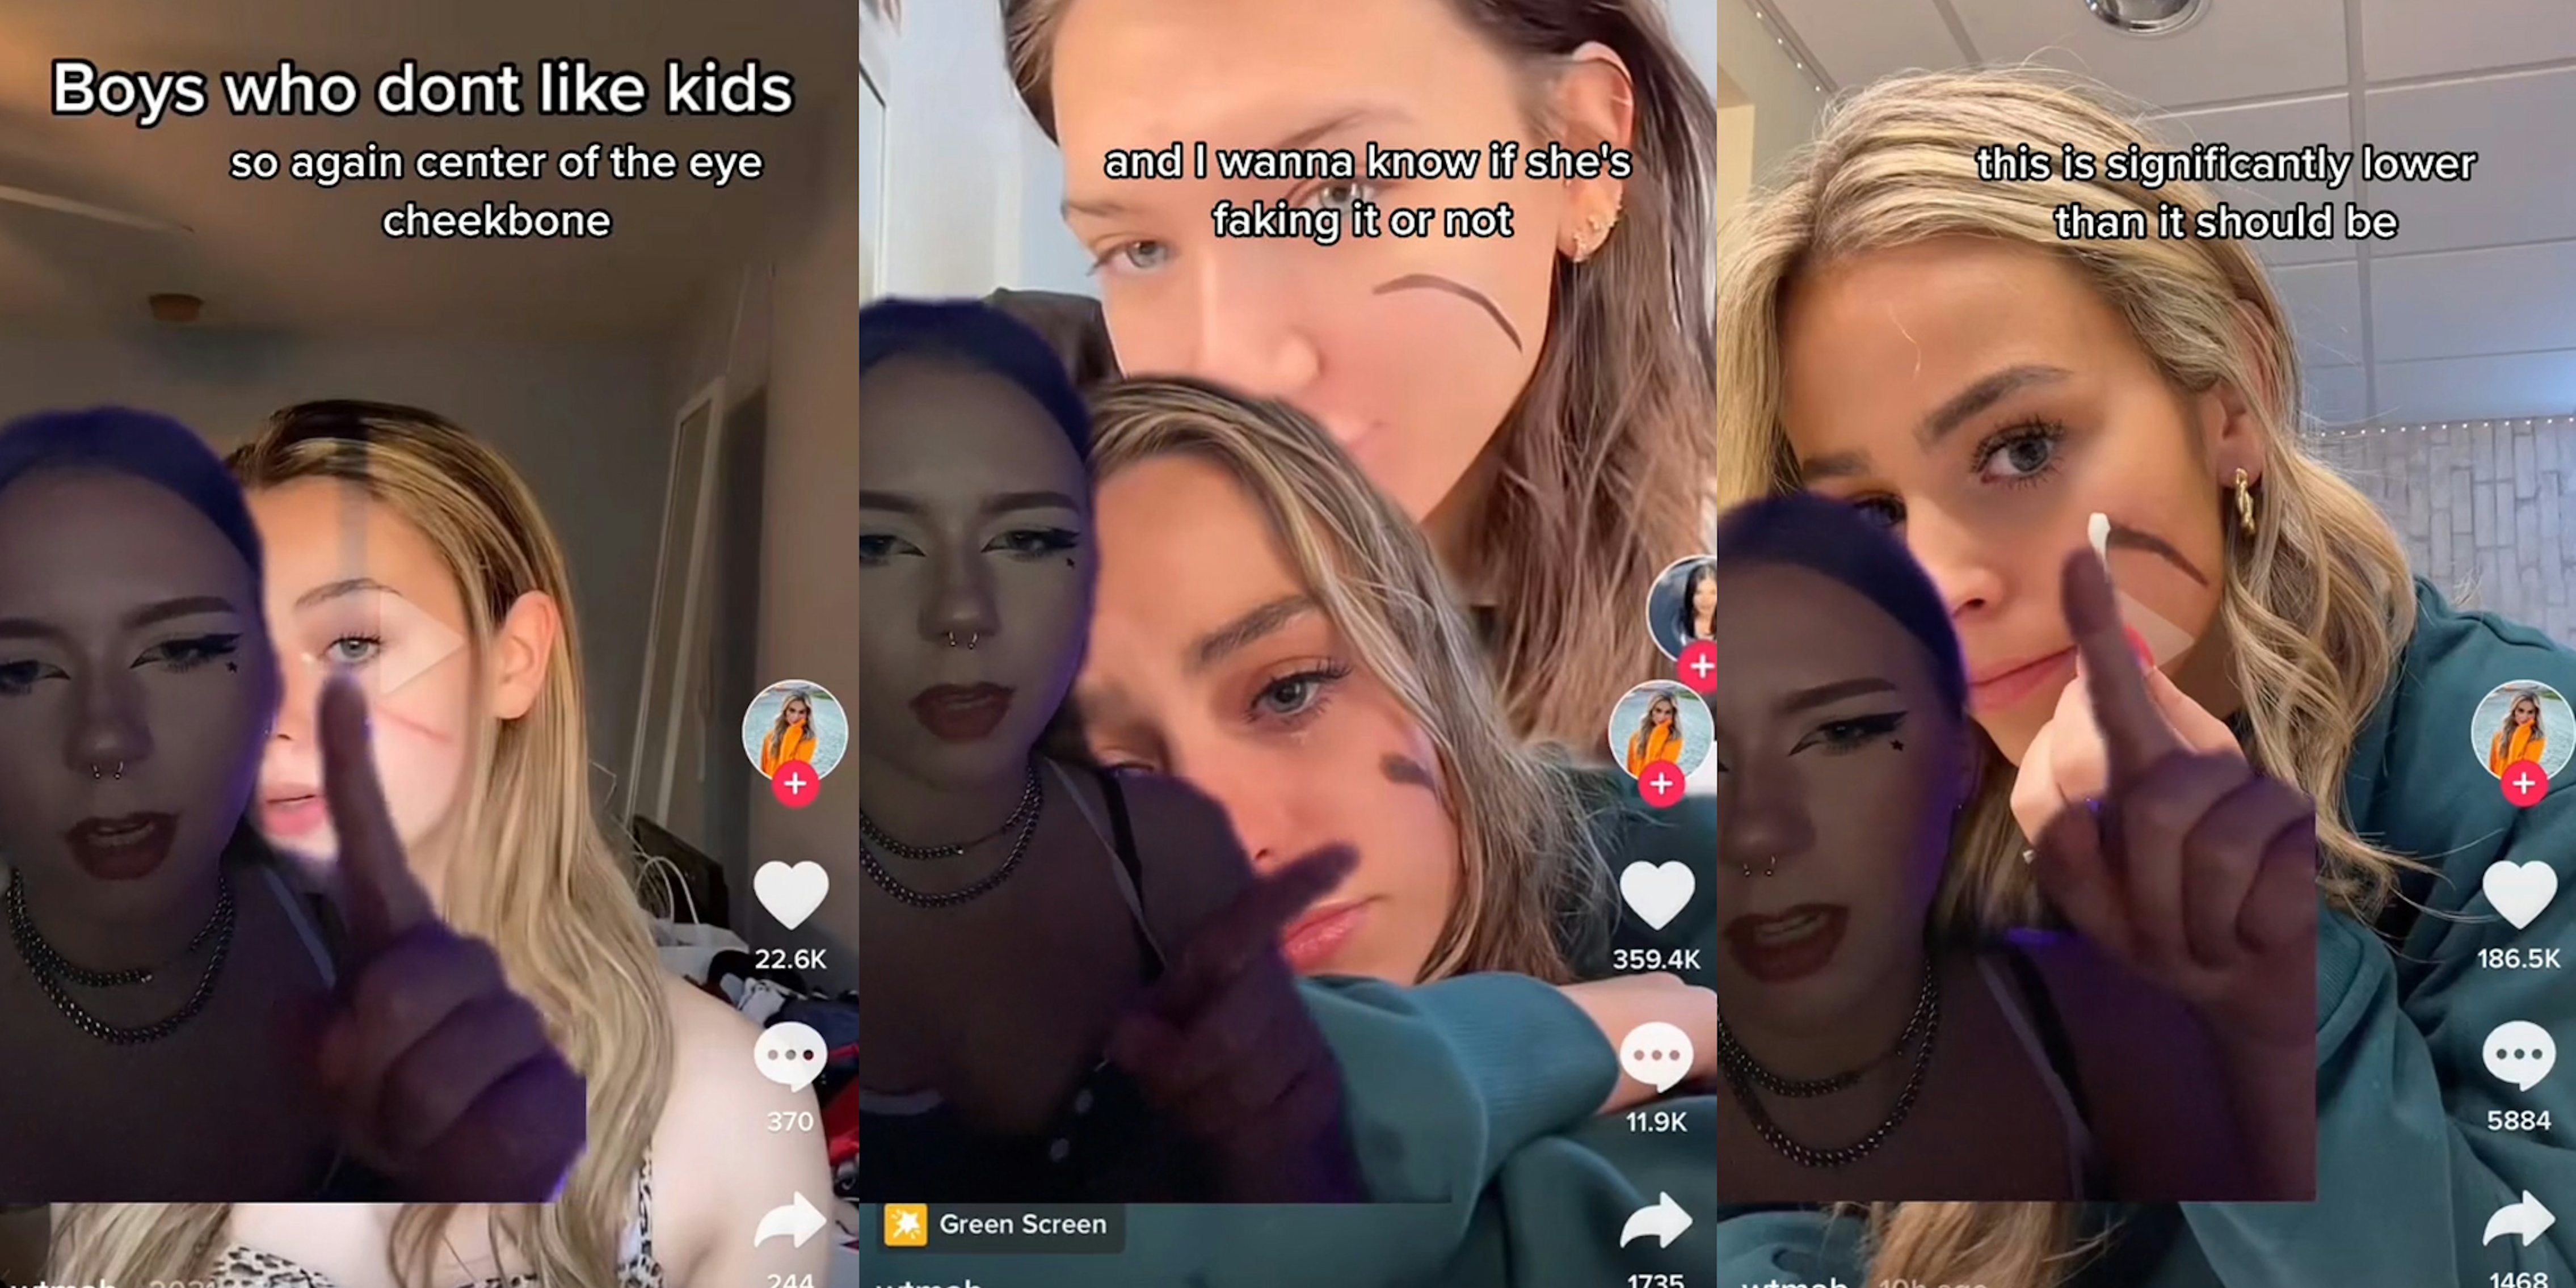 woman greenscreen TikTok over another woman's TikTok with caption 'Boys who dont like kids' 'so again center of the eye cheekbone' (l) woman greenscreen TikTok over another woman's TikTok with caption 'and I wanna know if she's faking it or not' (c) woman greenscreen TikTok over another woman's TikTok with caption 'this is significantly lower than it should be' (r)